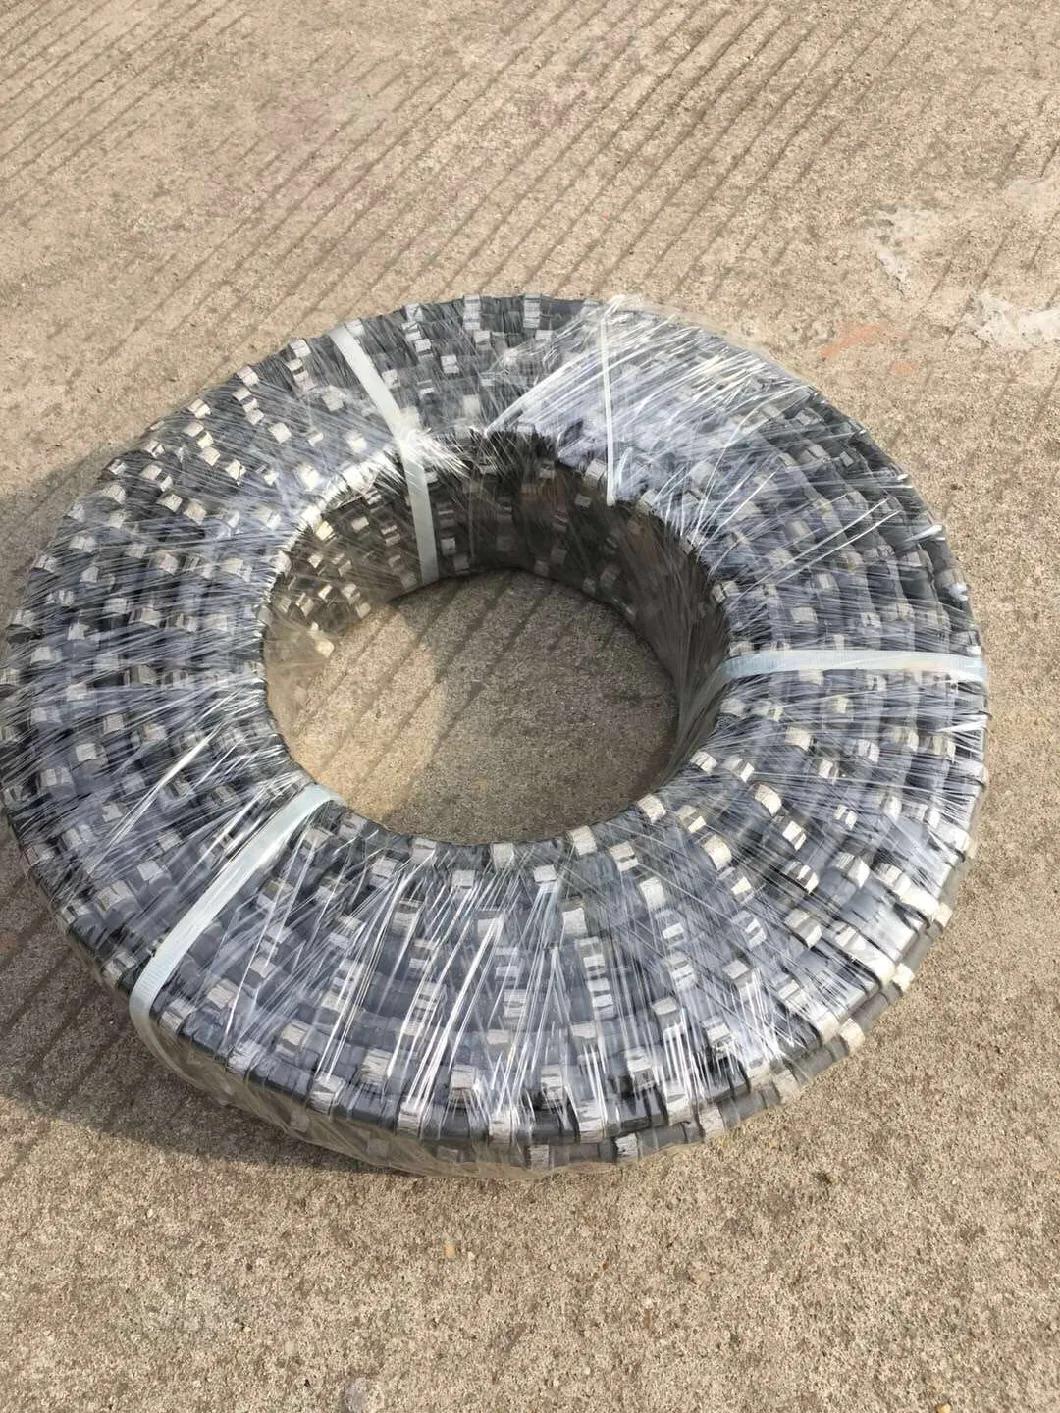 Diameter 8.8mm Diamond Wire Saw Rope for Granite Marble Stone Cutting and Profiling